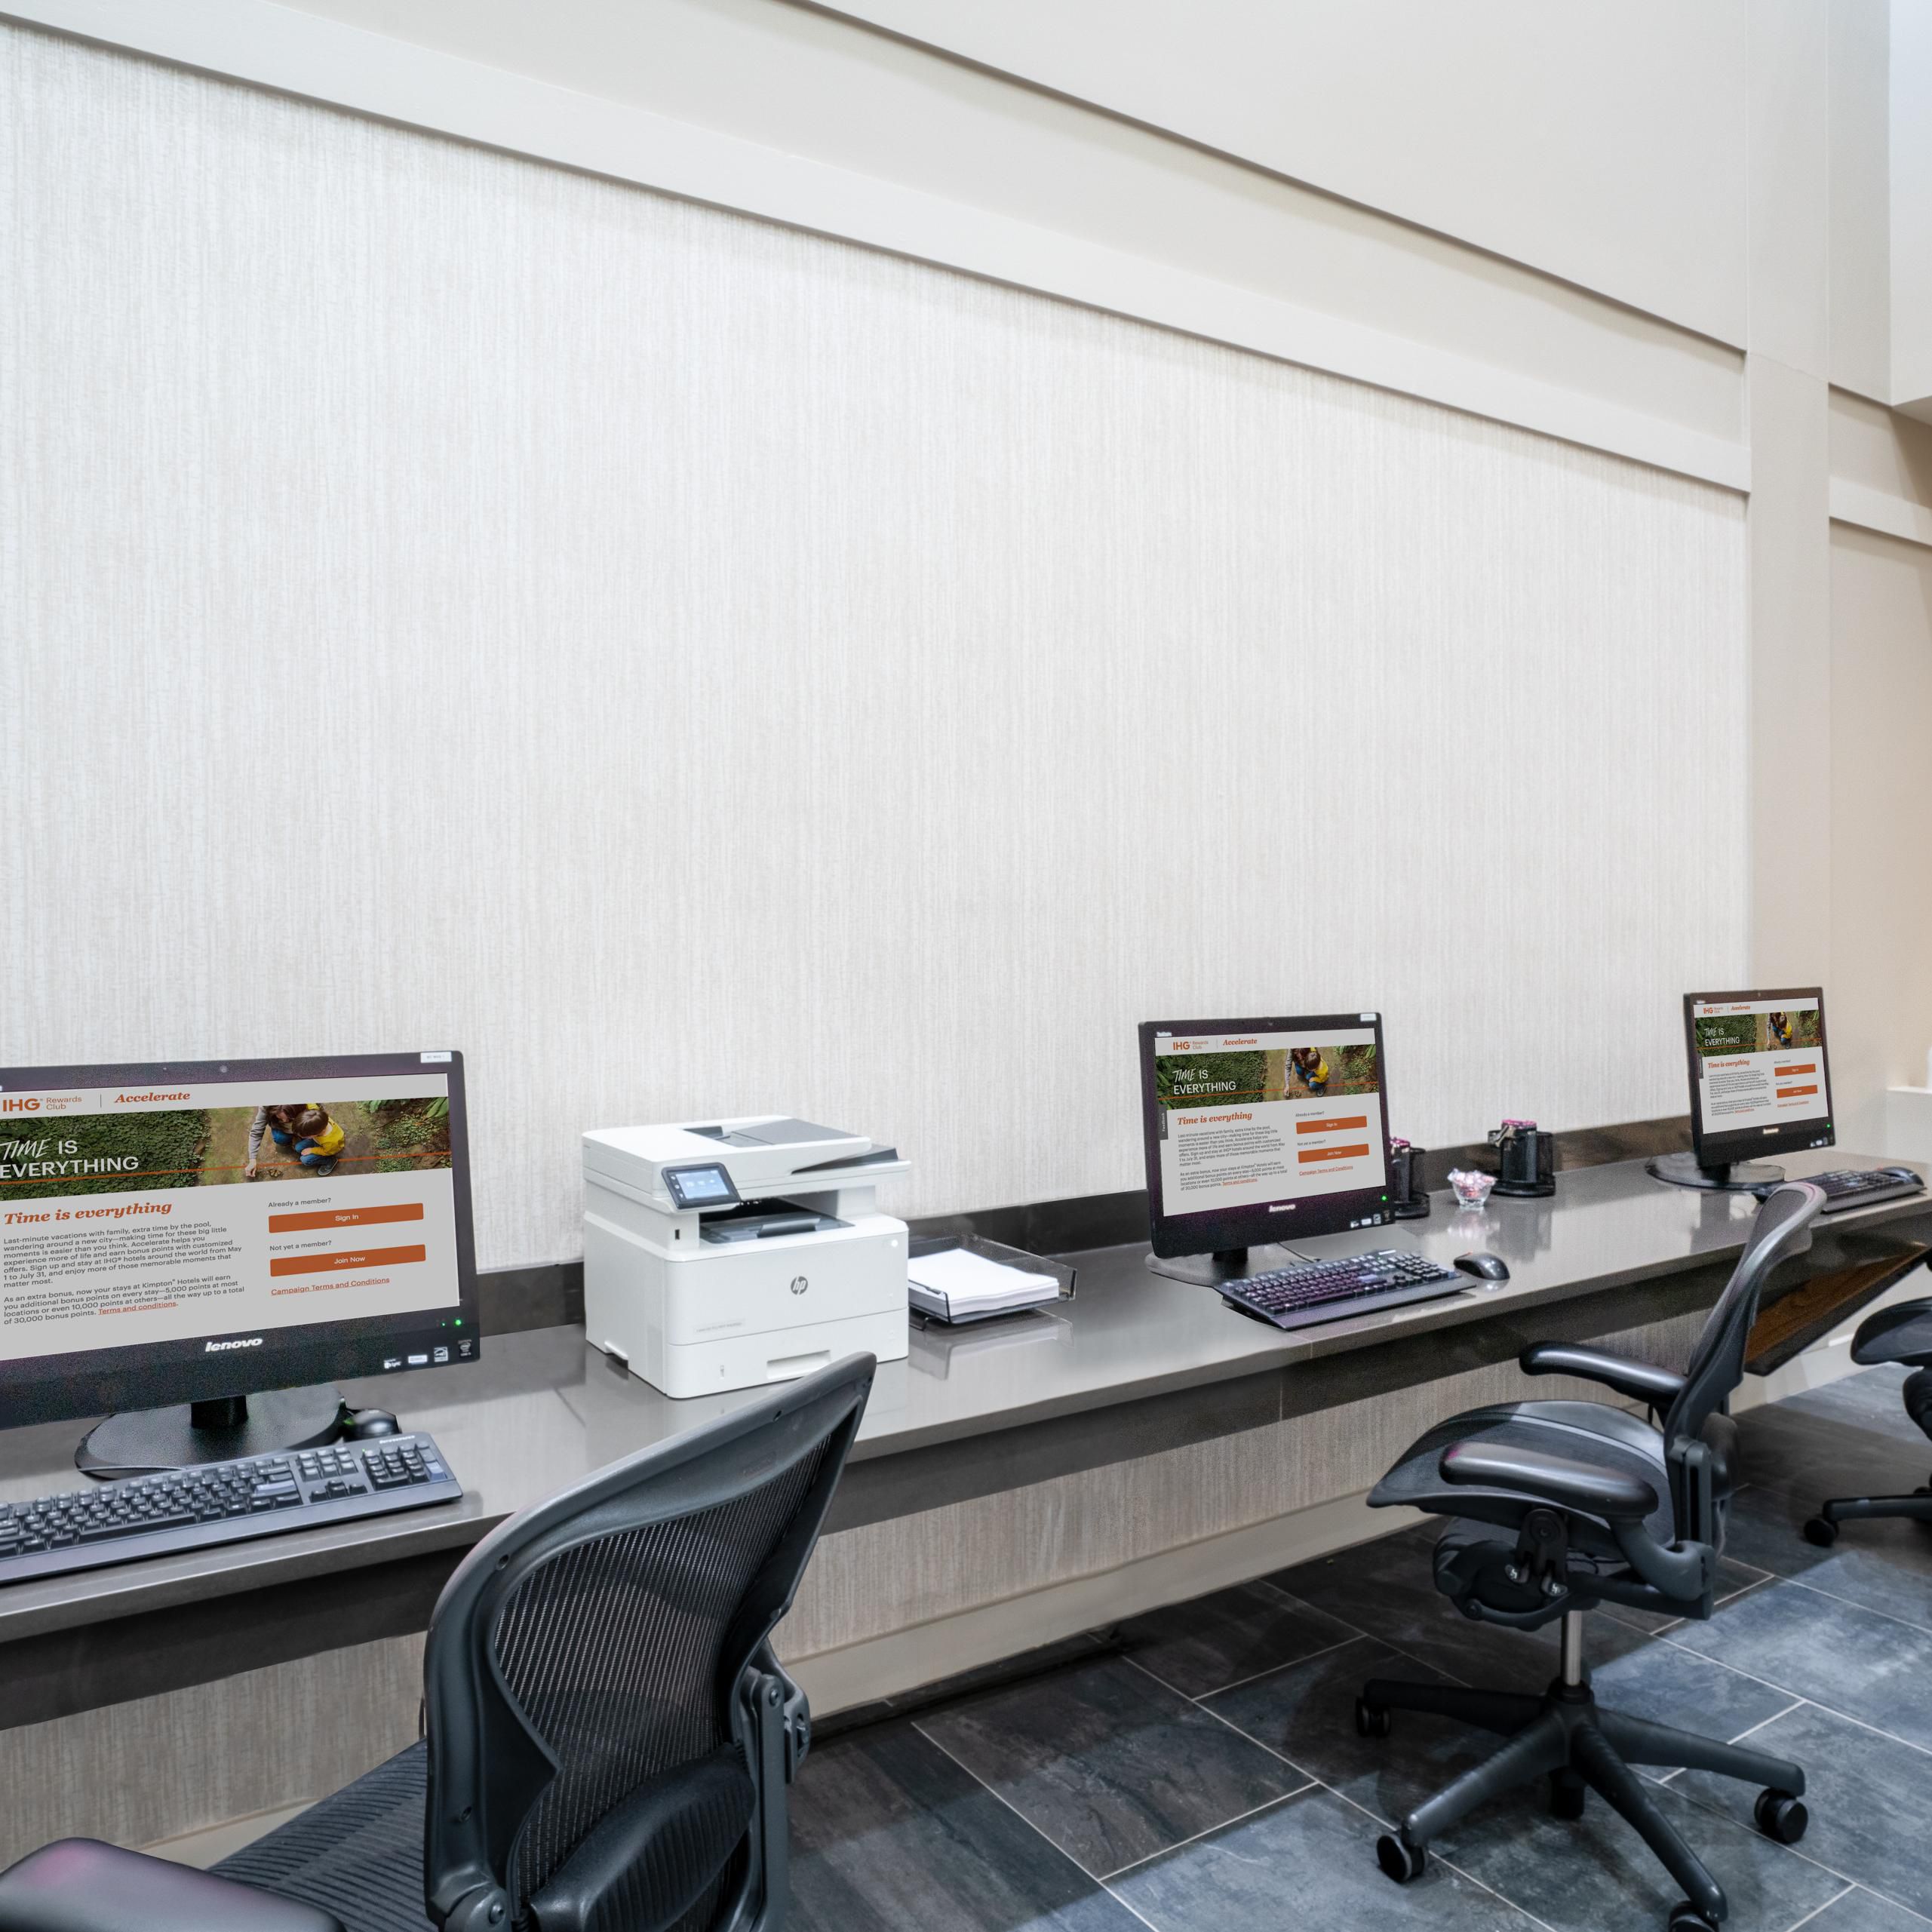 Our comprehensive Business Center will help you stay productive.